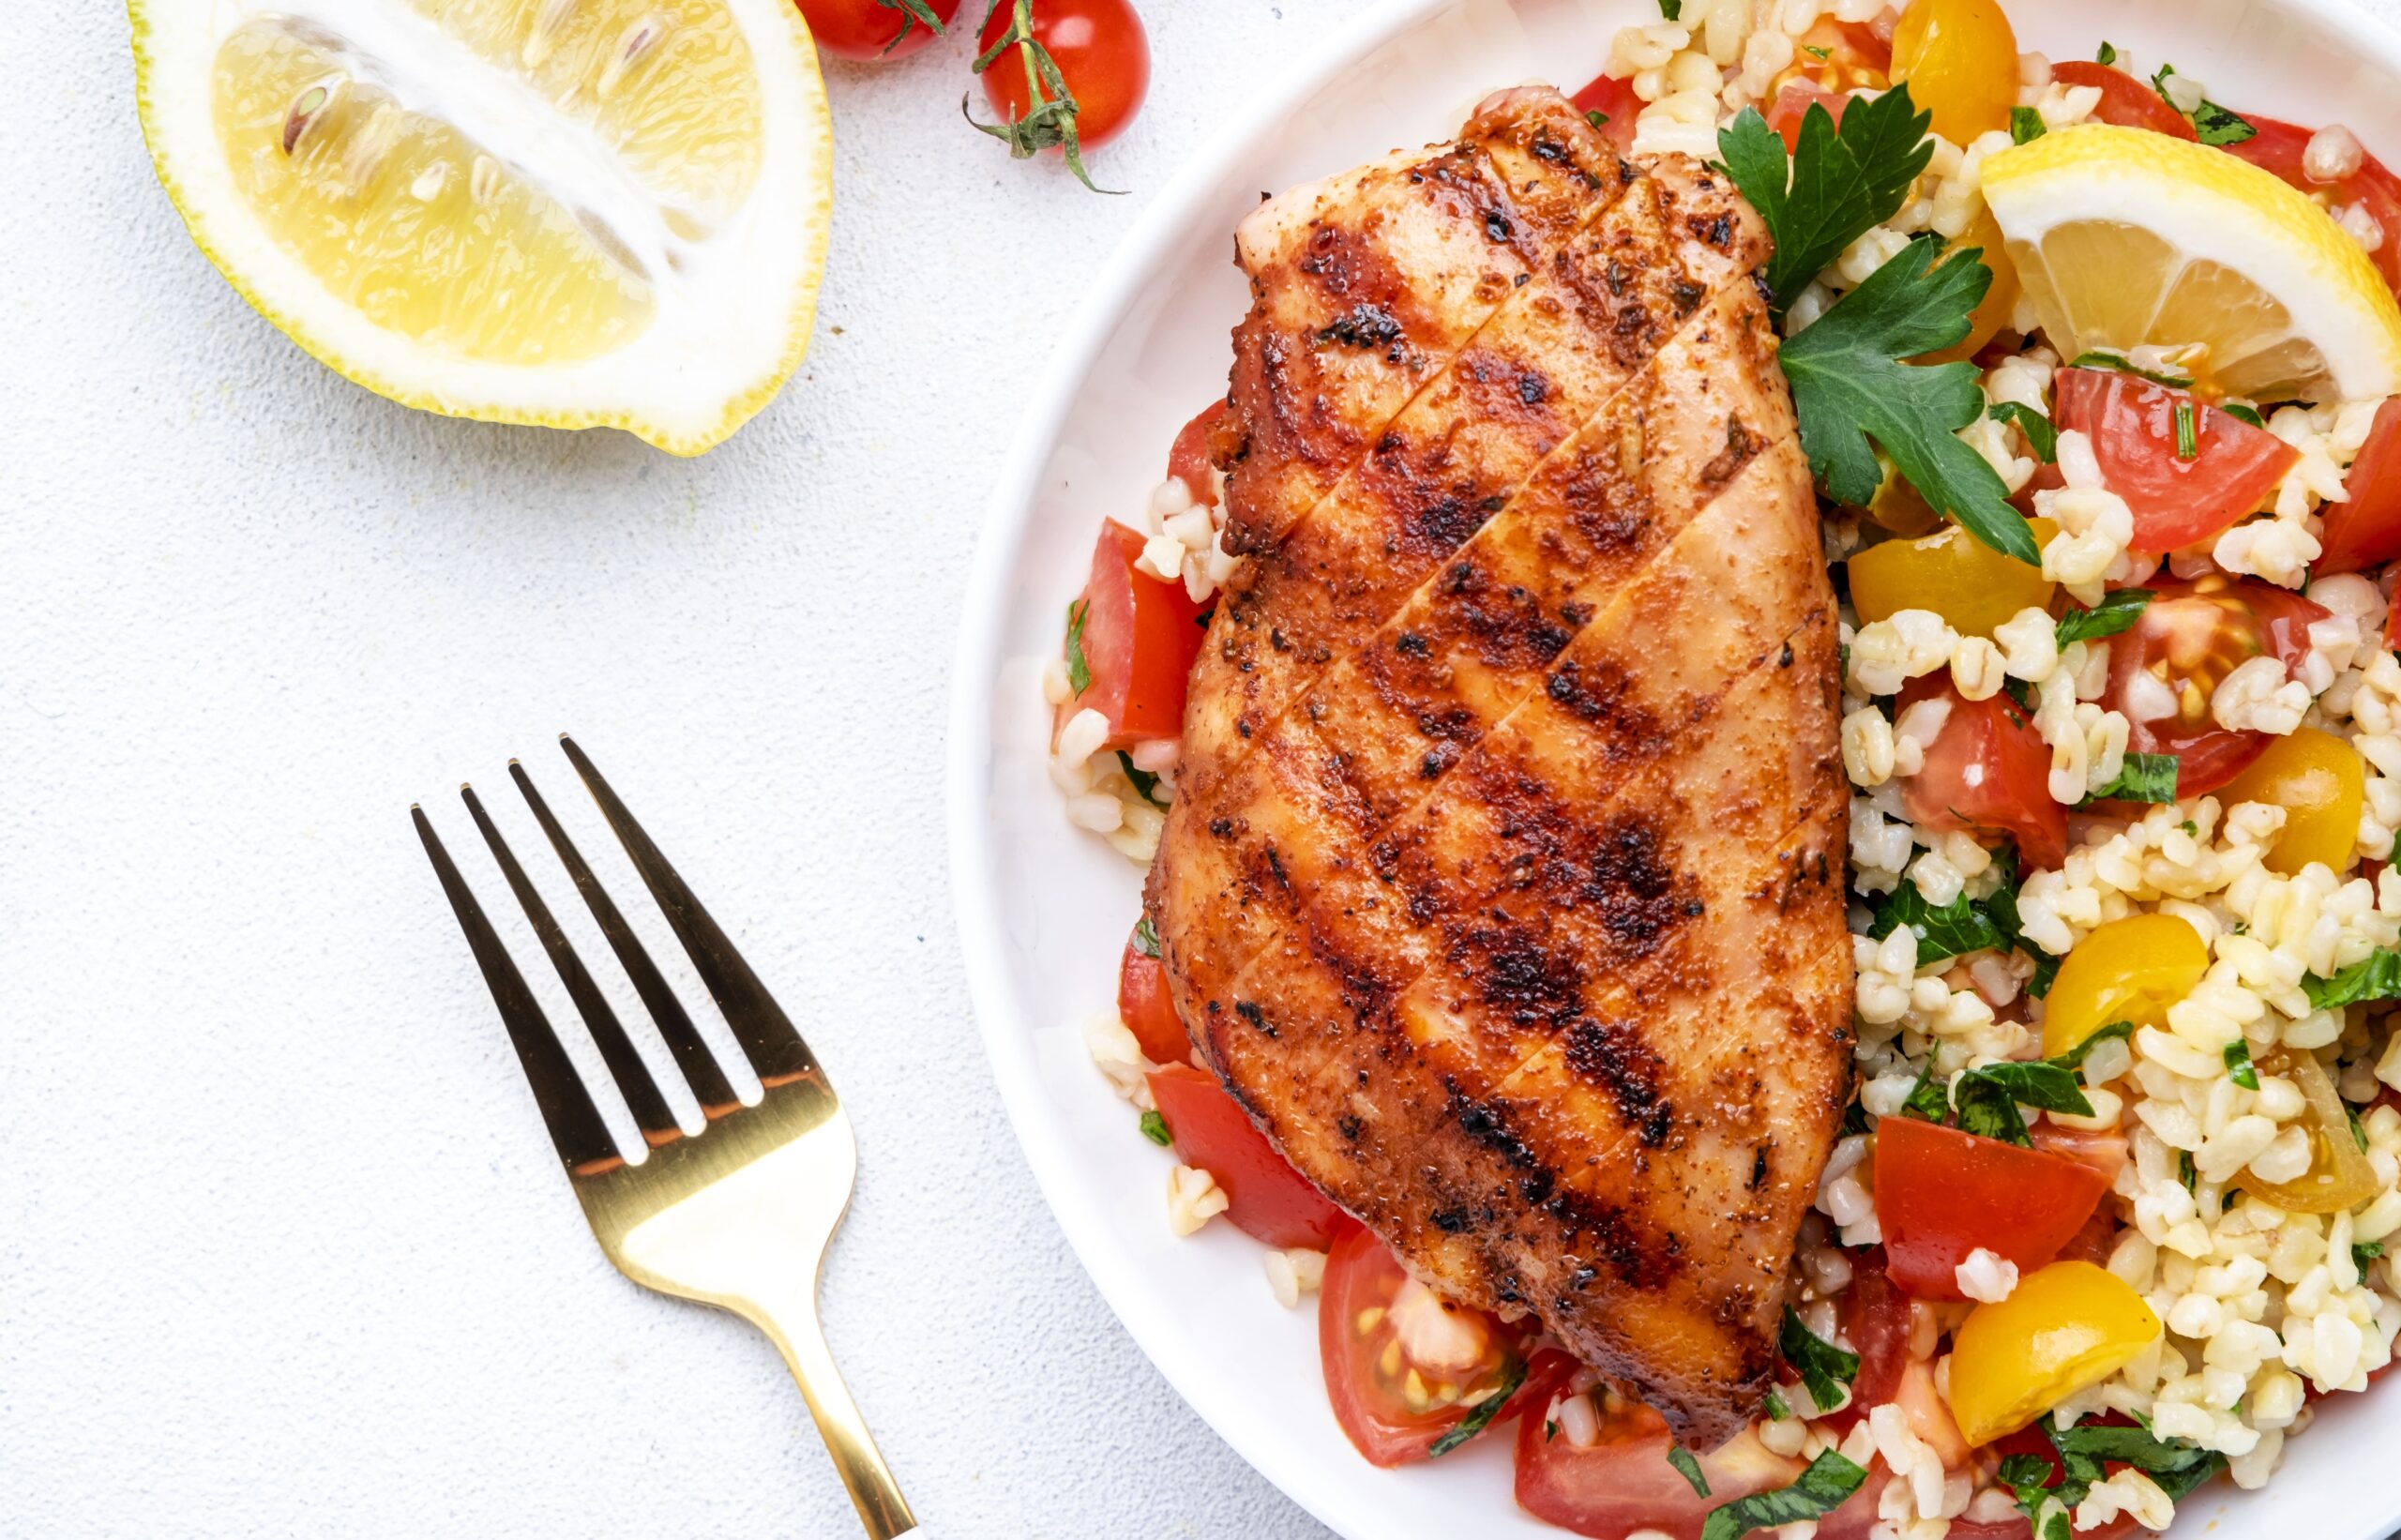 Savor the flavors of health with El Afrik Lounge's Grilled Chicken Fillet and Bulgur Tabbouleh Salad. Fresh, nutritious, and bursting with taste. Dive into a delicious, wholesome meal today at El Afrik Lounge.